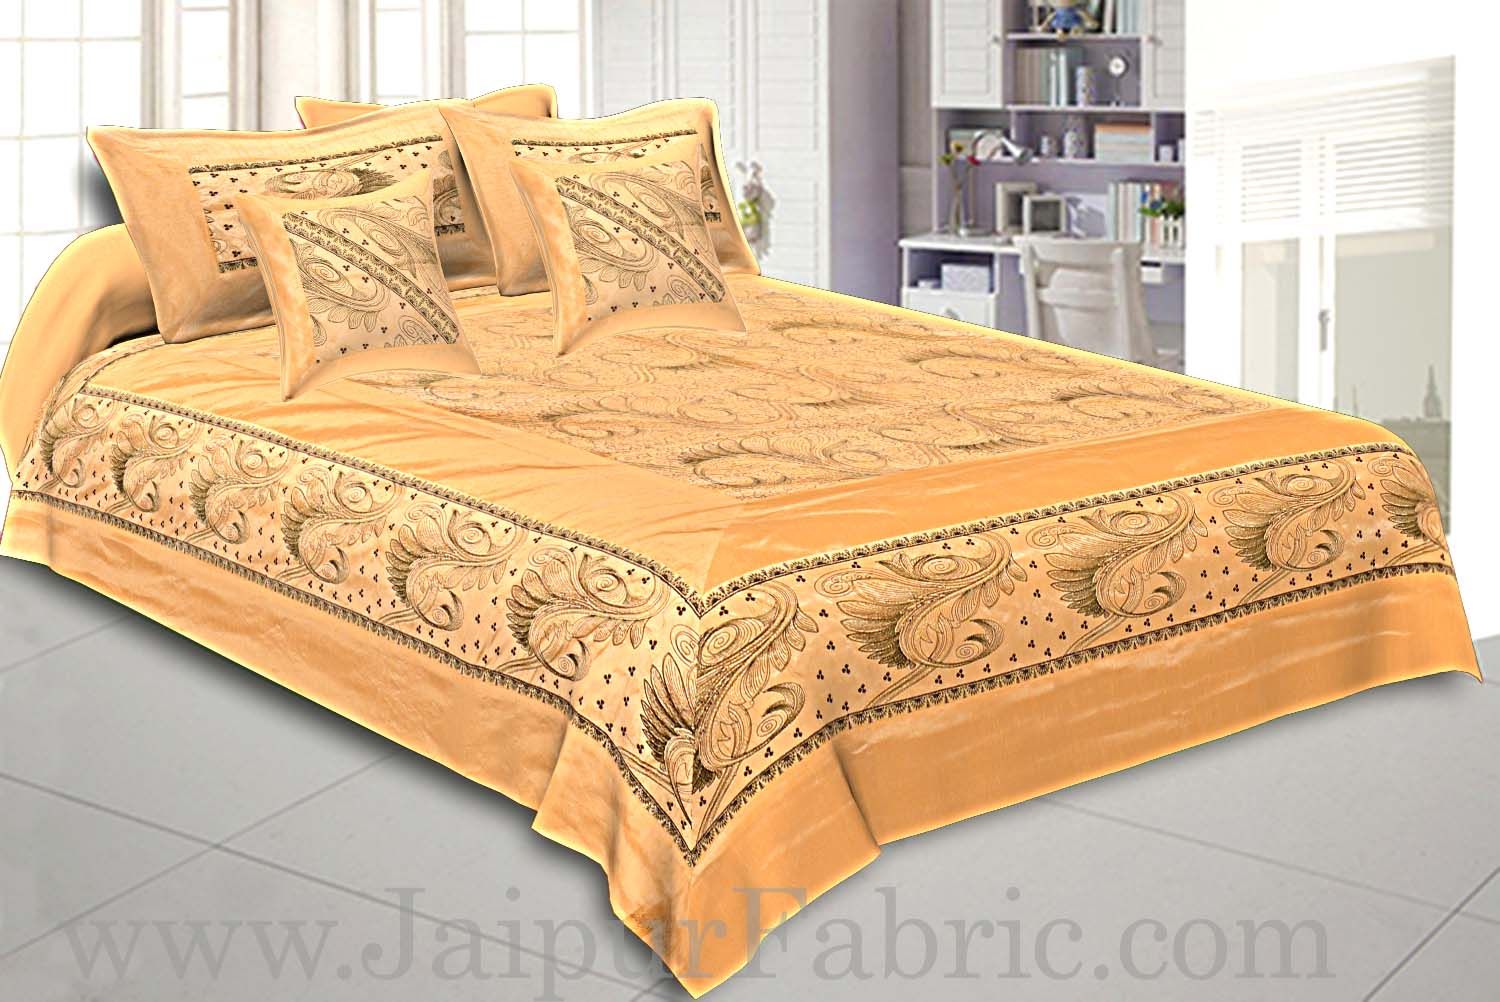 Silk Bed Sheet  Cream Color With Lace Work Superfine bed cover